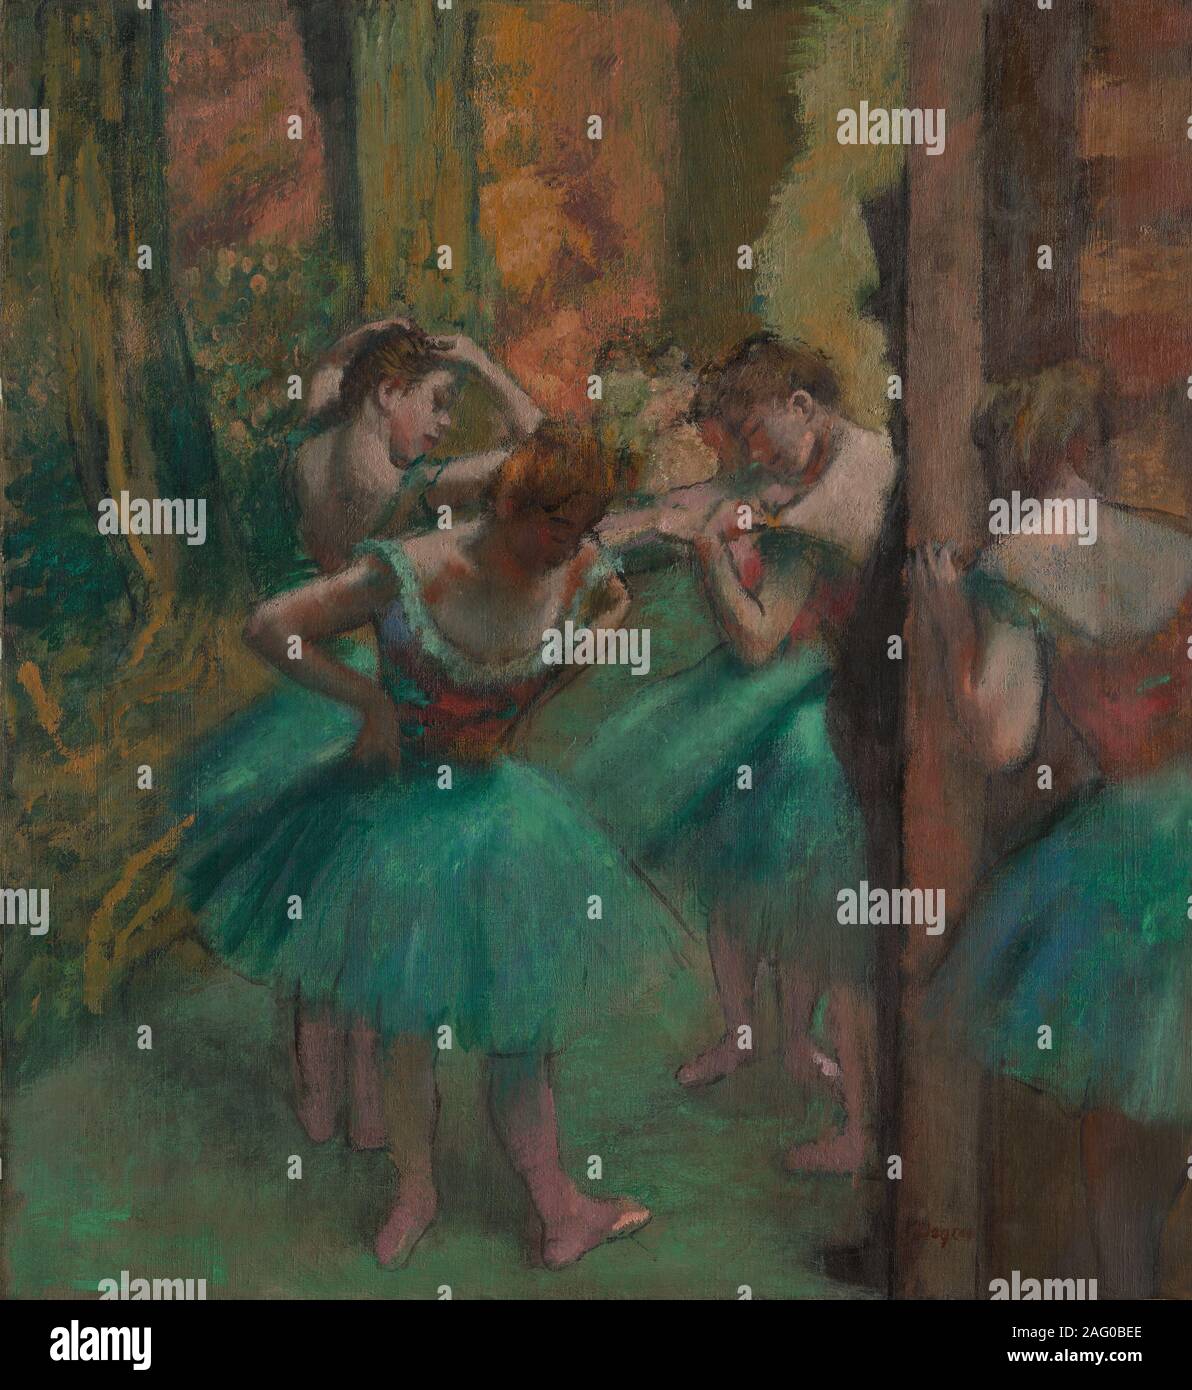 Dancers, Pink and Green, ca. 1890. Stock Photo